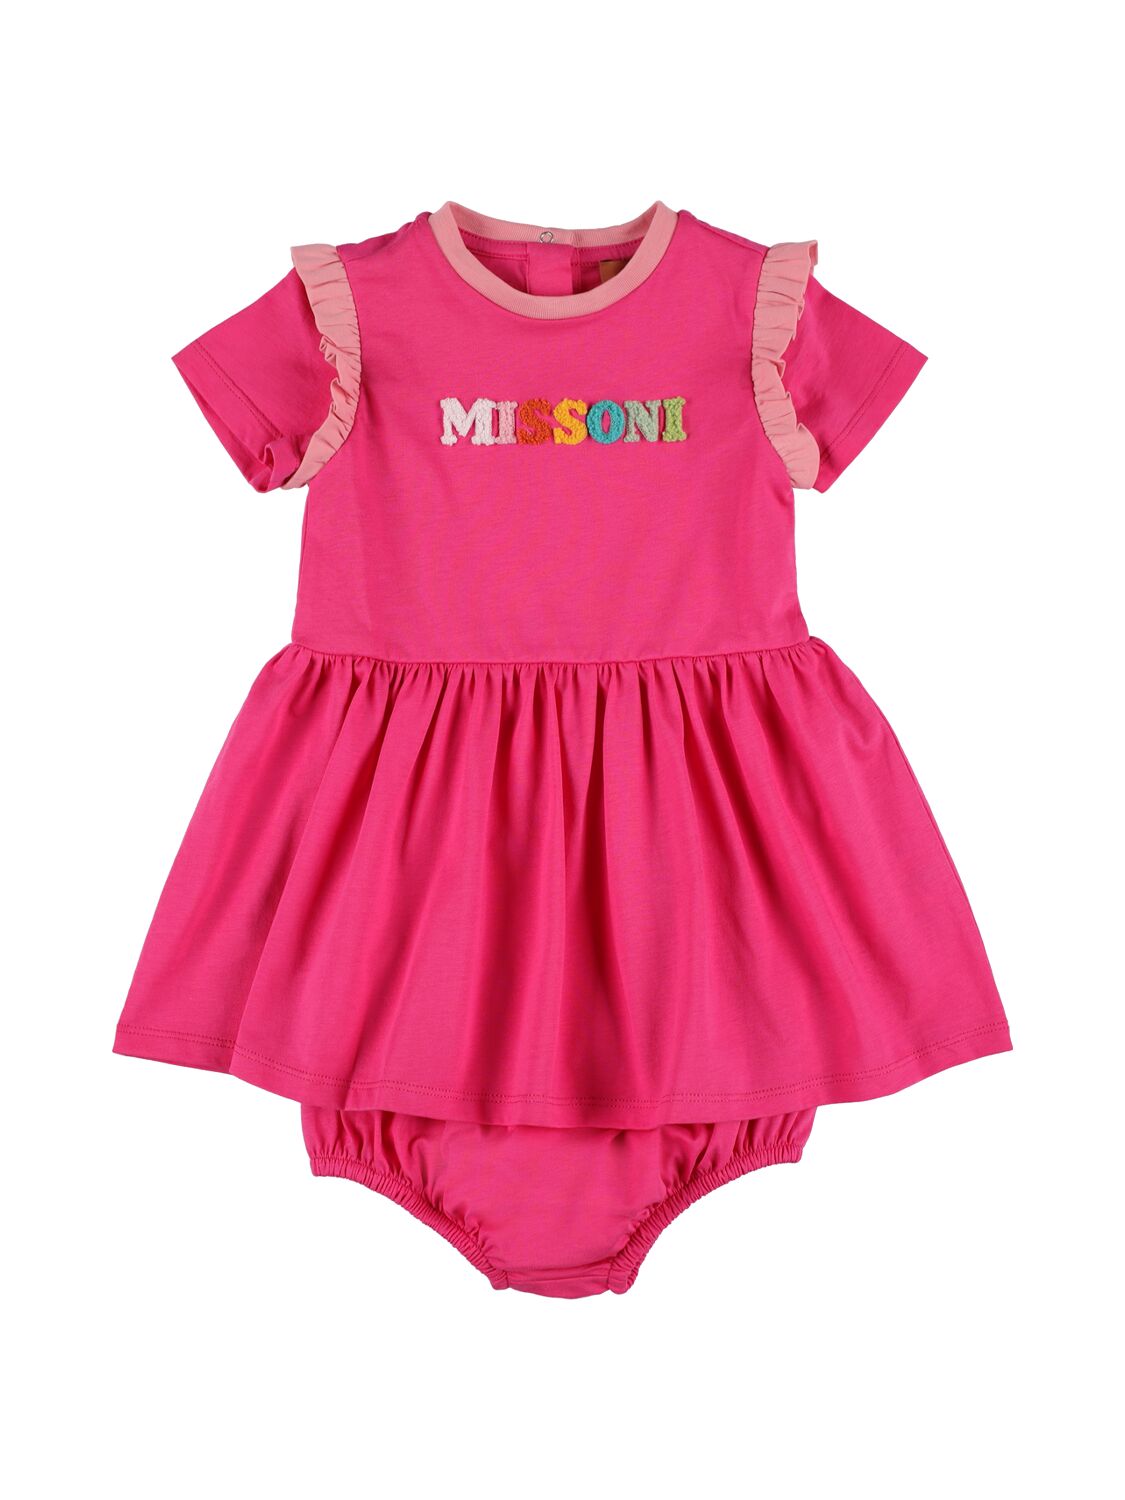 Image of Cotton Jersey Dress & Diaper Cover